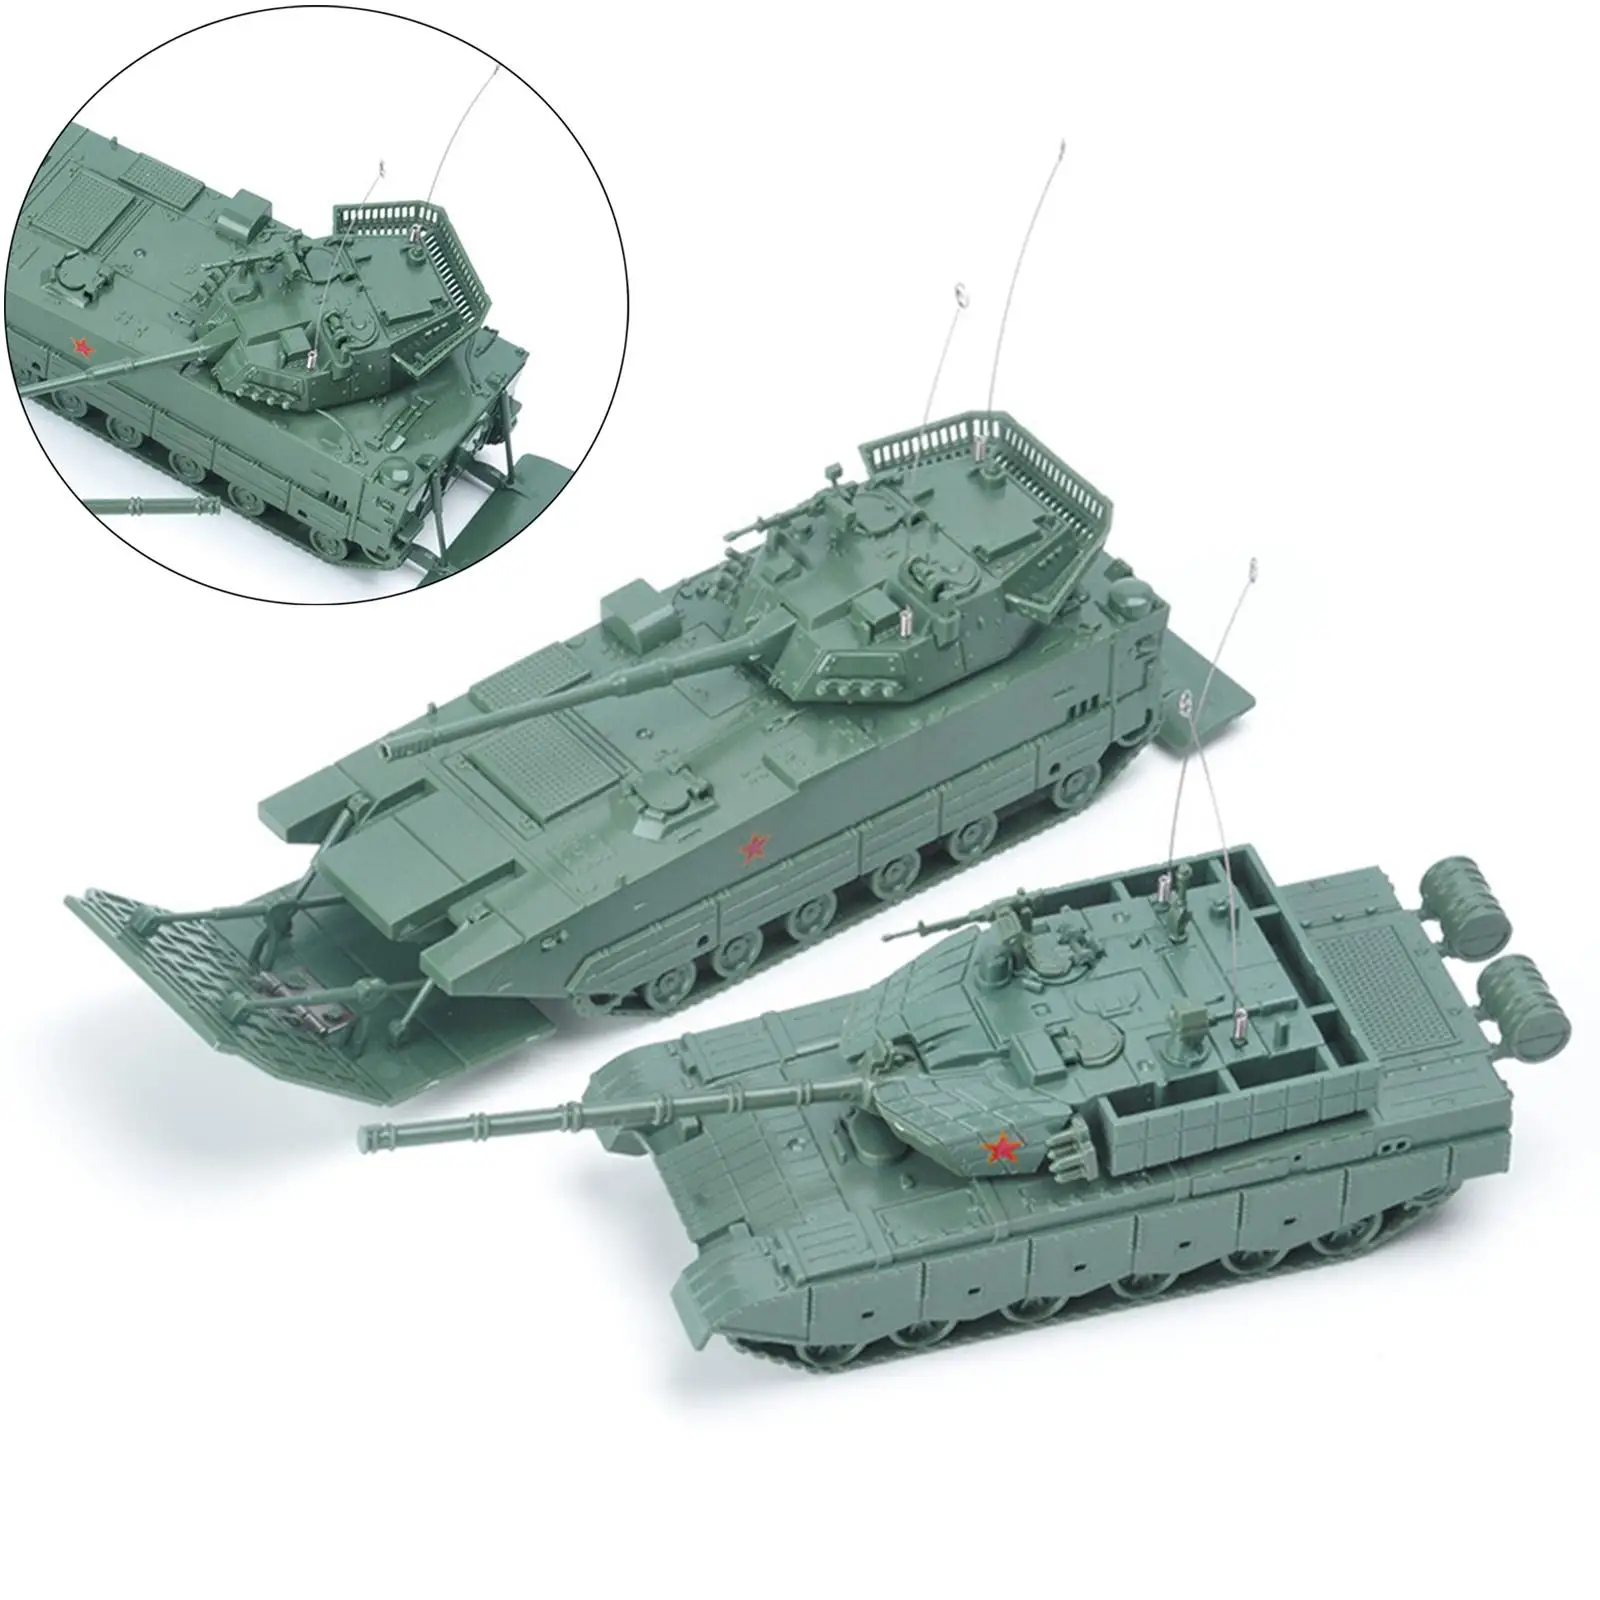 2Pcs 1:72 4D Vehicles Model Set Puzzles Tank Model Armored Car Collection Action Model Educational Toy for game Holiday